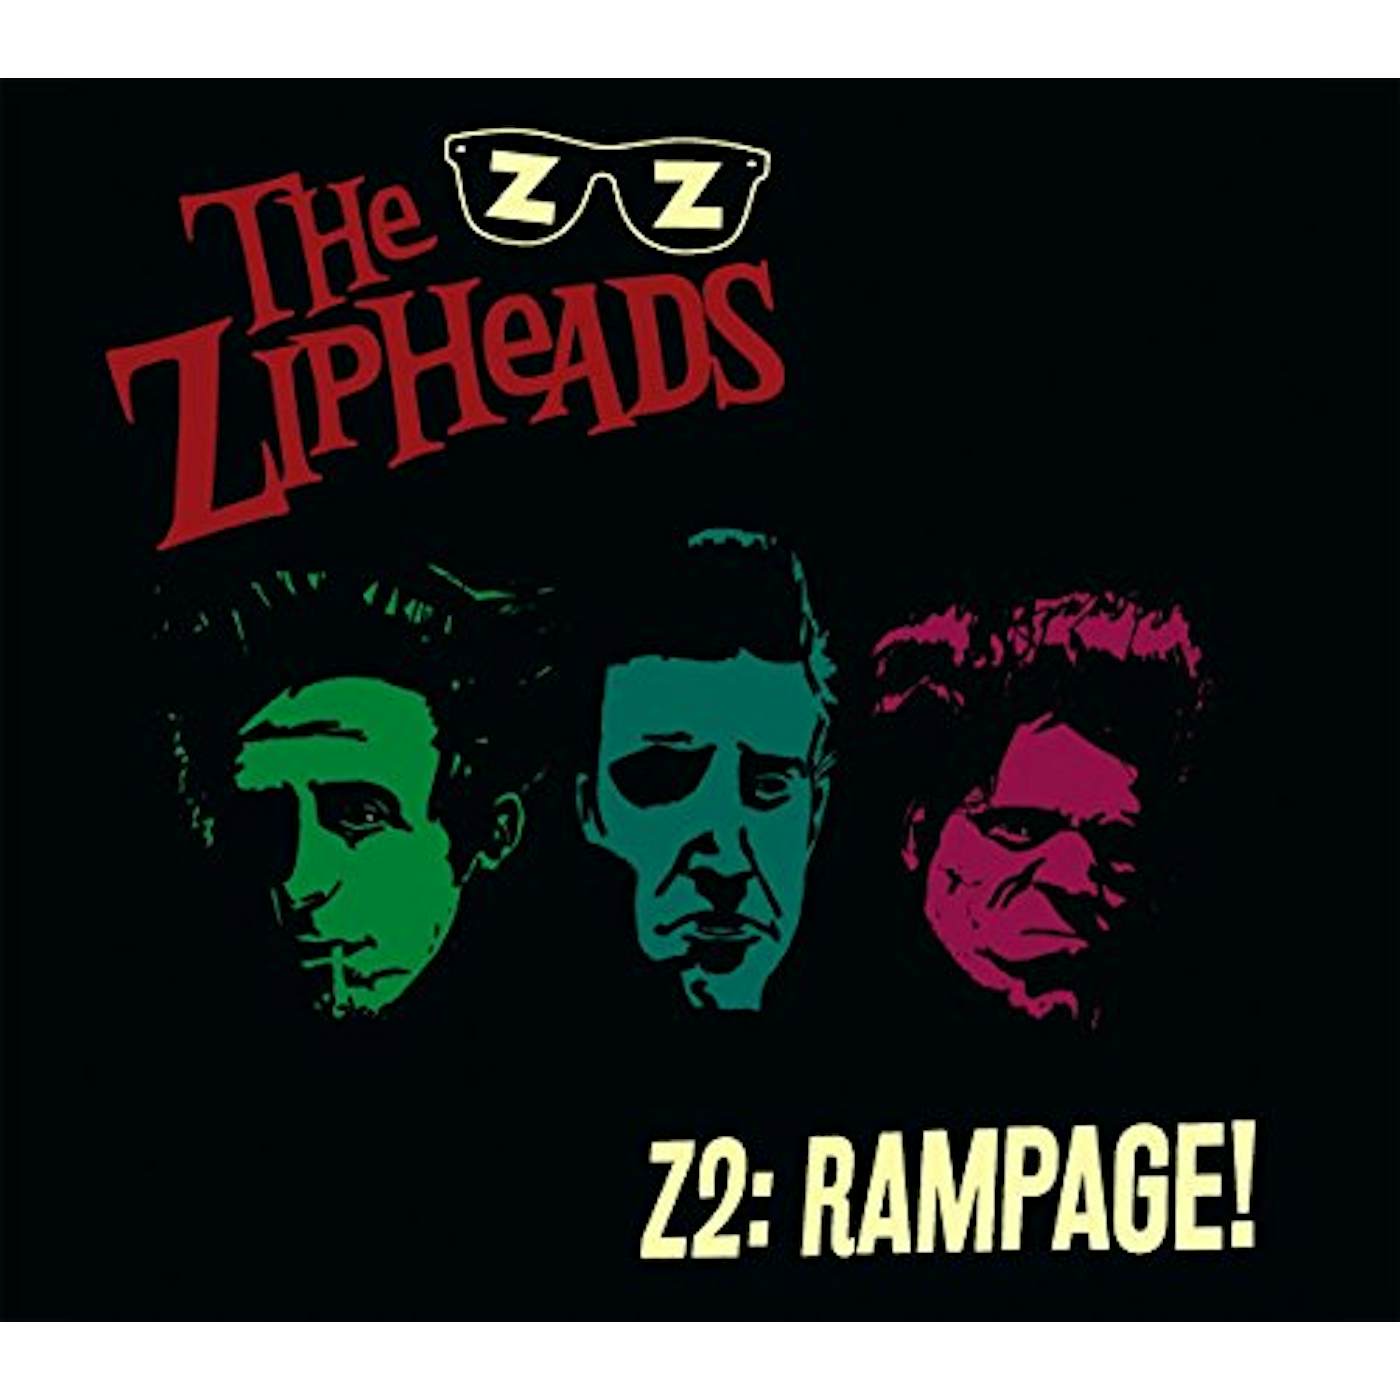 The Zipheads Z2:RAMPAGE CD